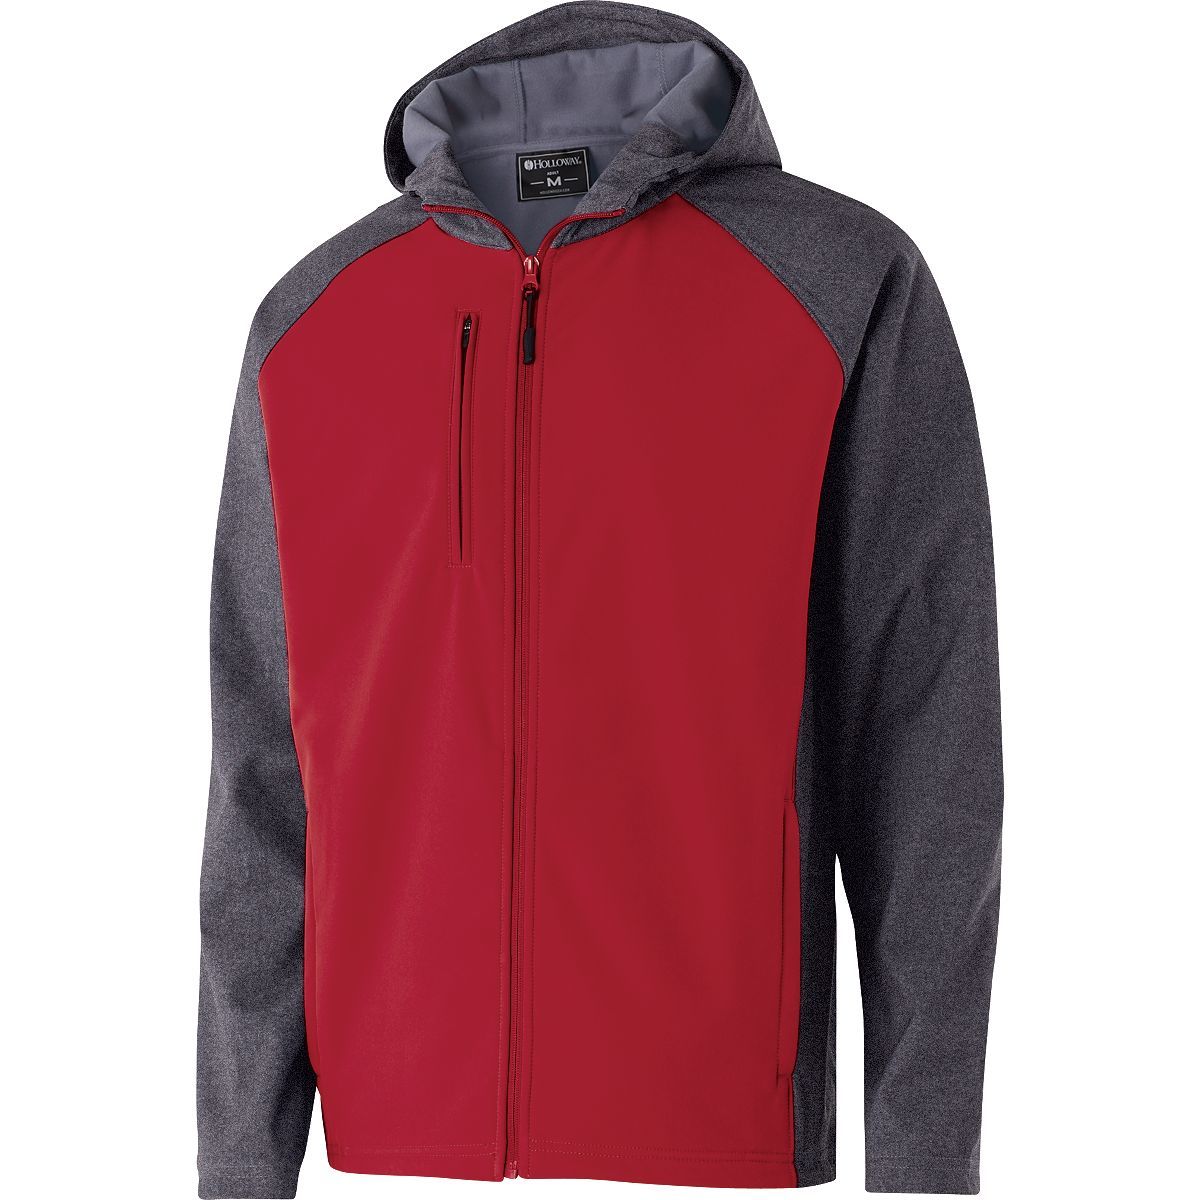 Holloway Raider Softshell Jacket in Carbon Print/Scarlet  -Part of the Adult, Adult-Jacket, Holloway, Outerwear product lines at KanaleyCreations.com